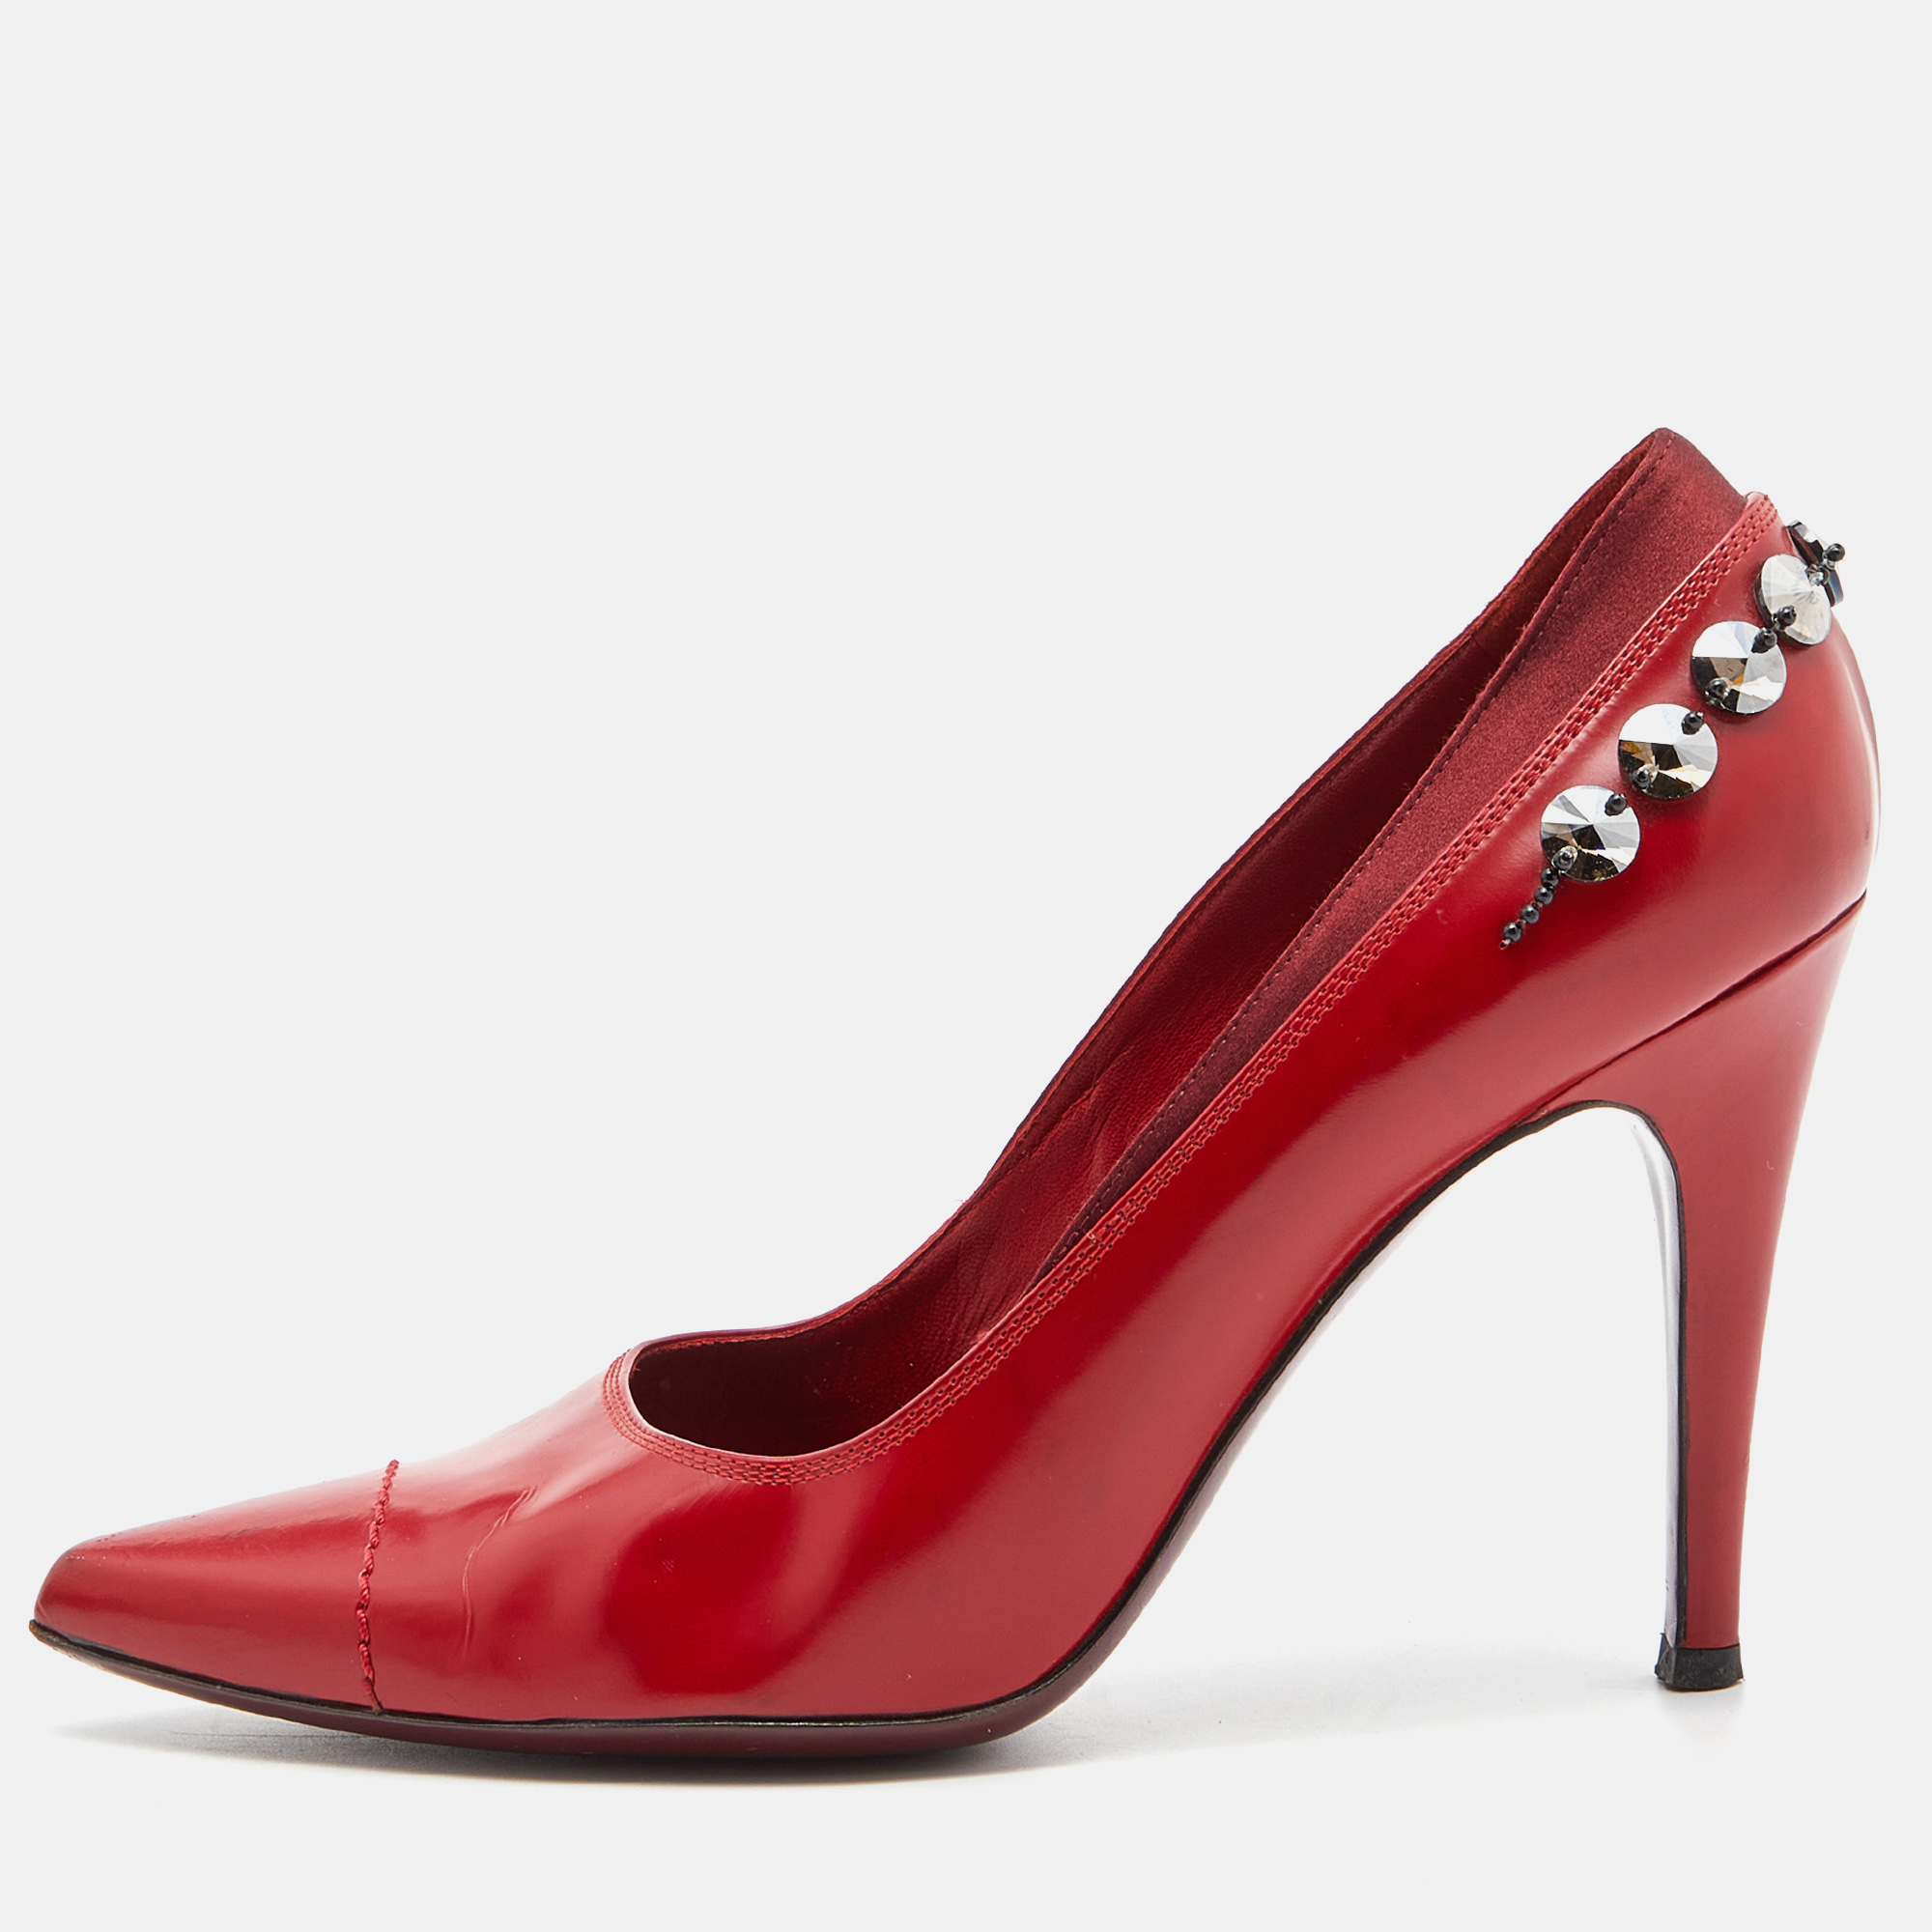 Louis vuitton red leather and satin crystal embellished pumps size 39